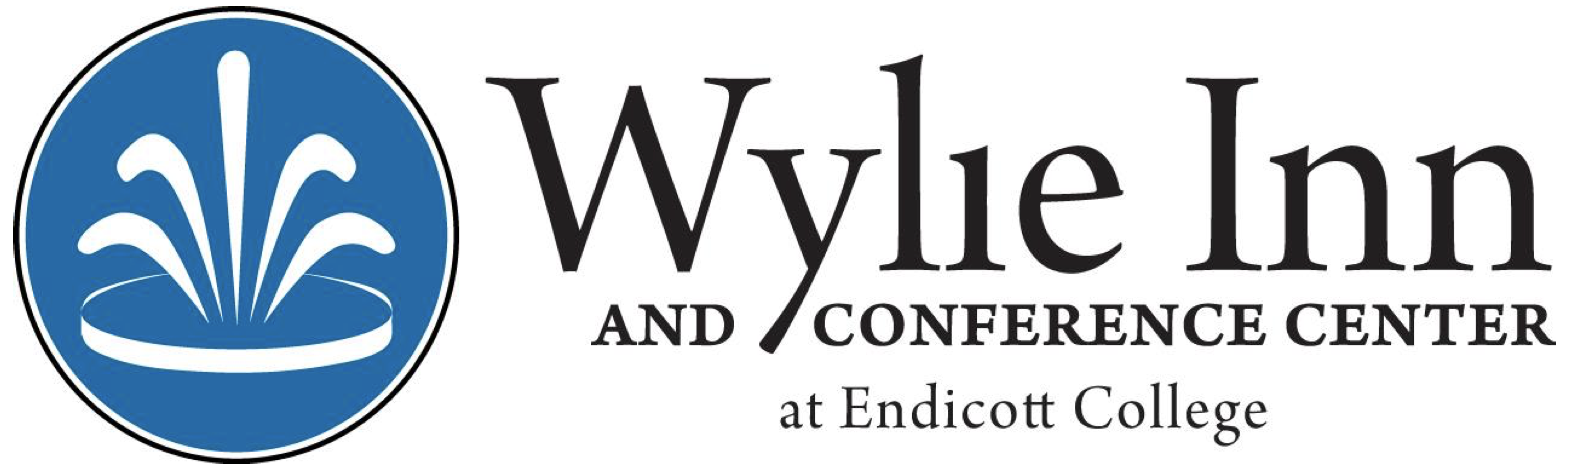 Wylie Center & Tupper Manor at Endicott College